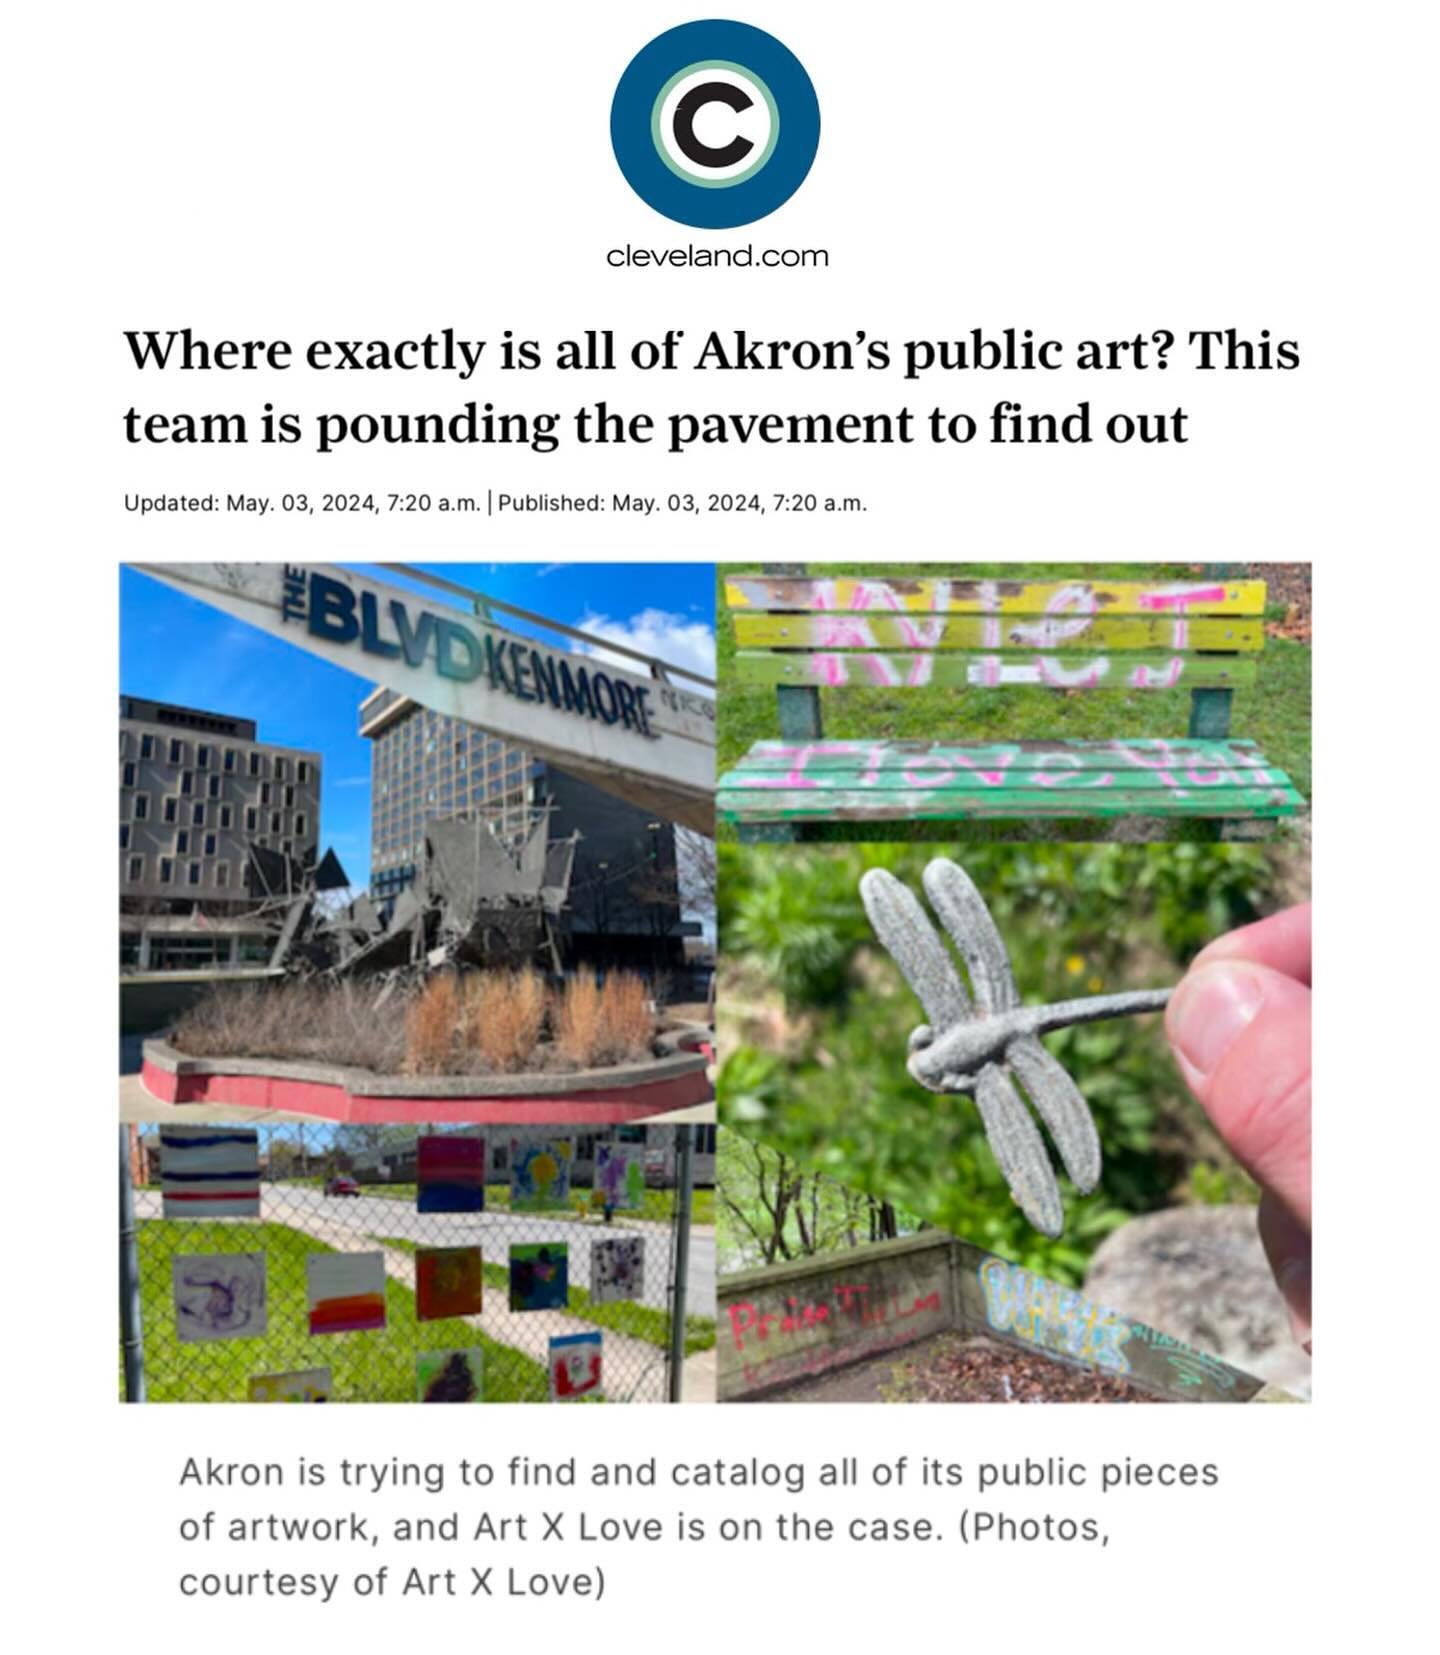 The City of Akron&rsquo;s public art inventory is starting to come into focus as we cross the 25% threshold of city-owned properties. @clevelanddotcom joined us in the field to learn more about the project and asked some great questions about the val